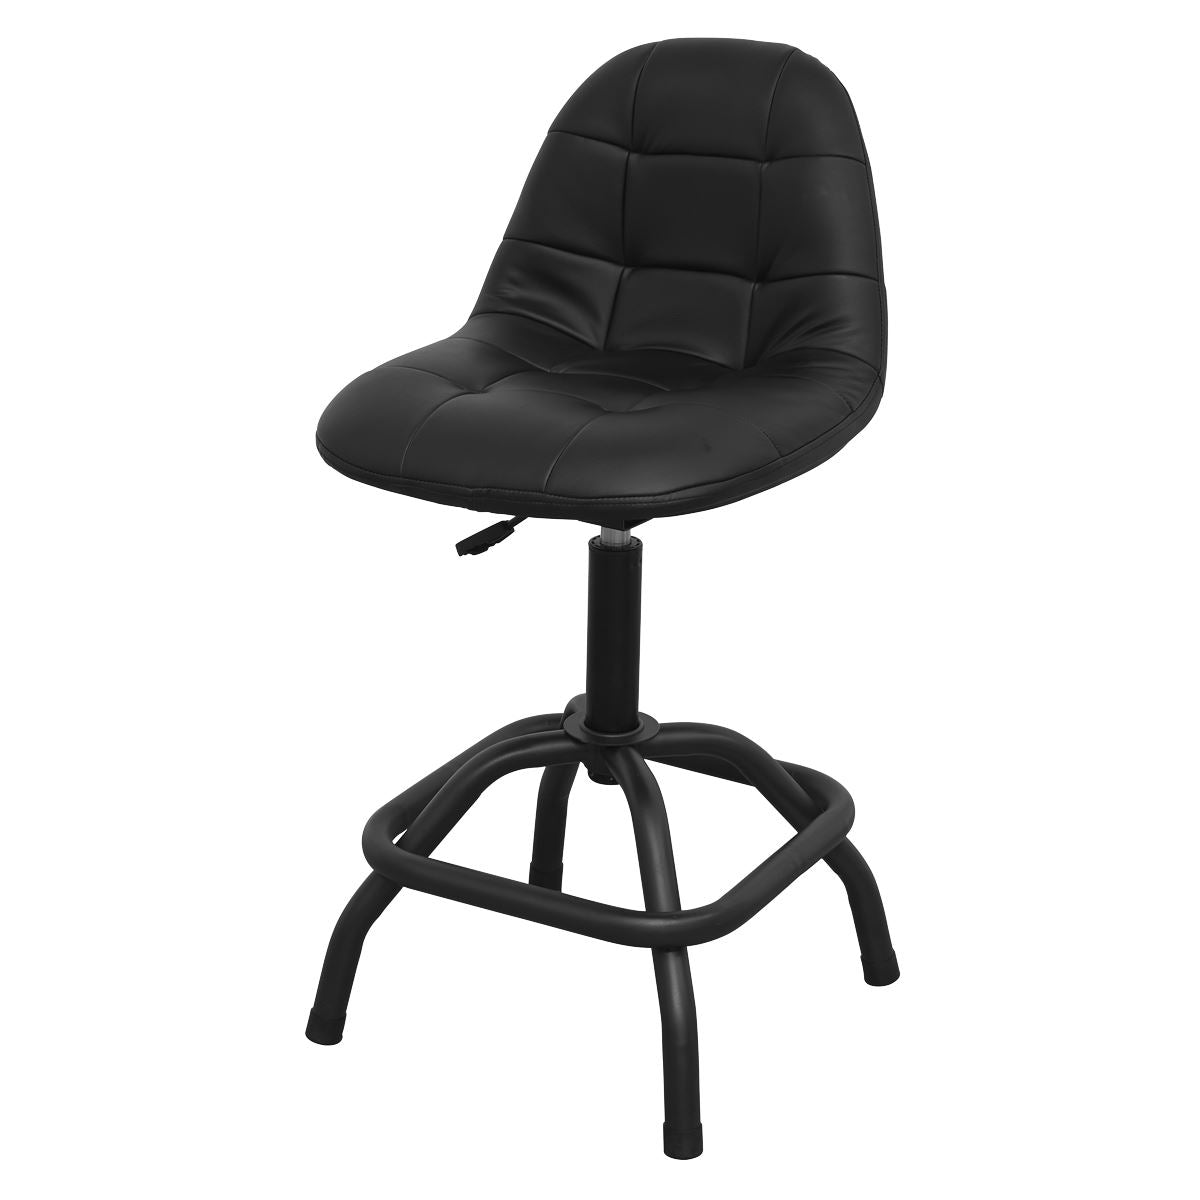 Sealey Premier Industrial Workshop Stool Pneumatic with Adjustable Height Swivel Seat & Back Rest